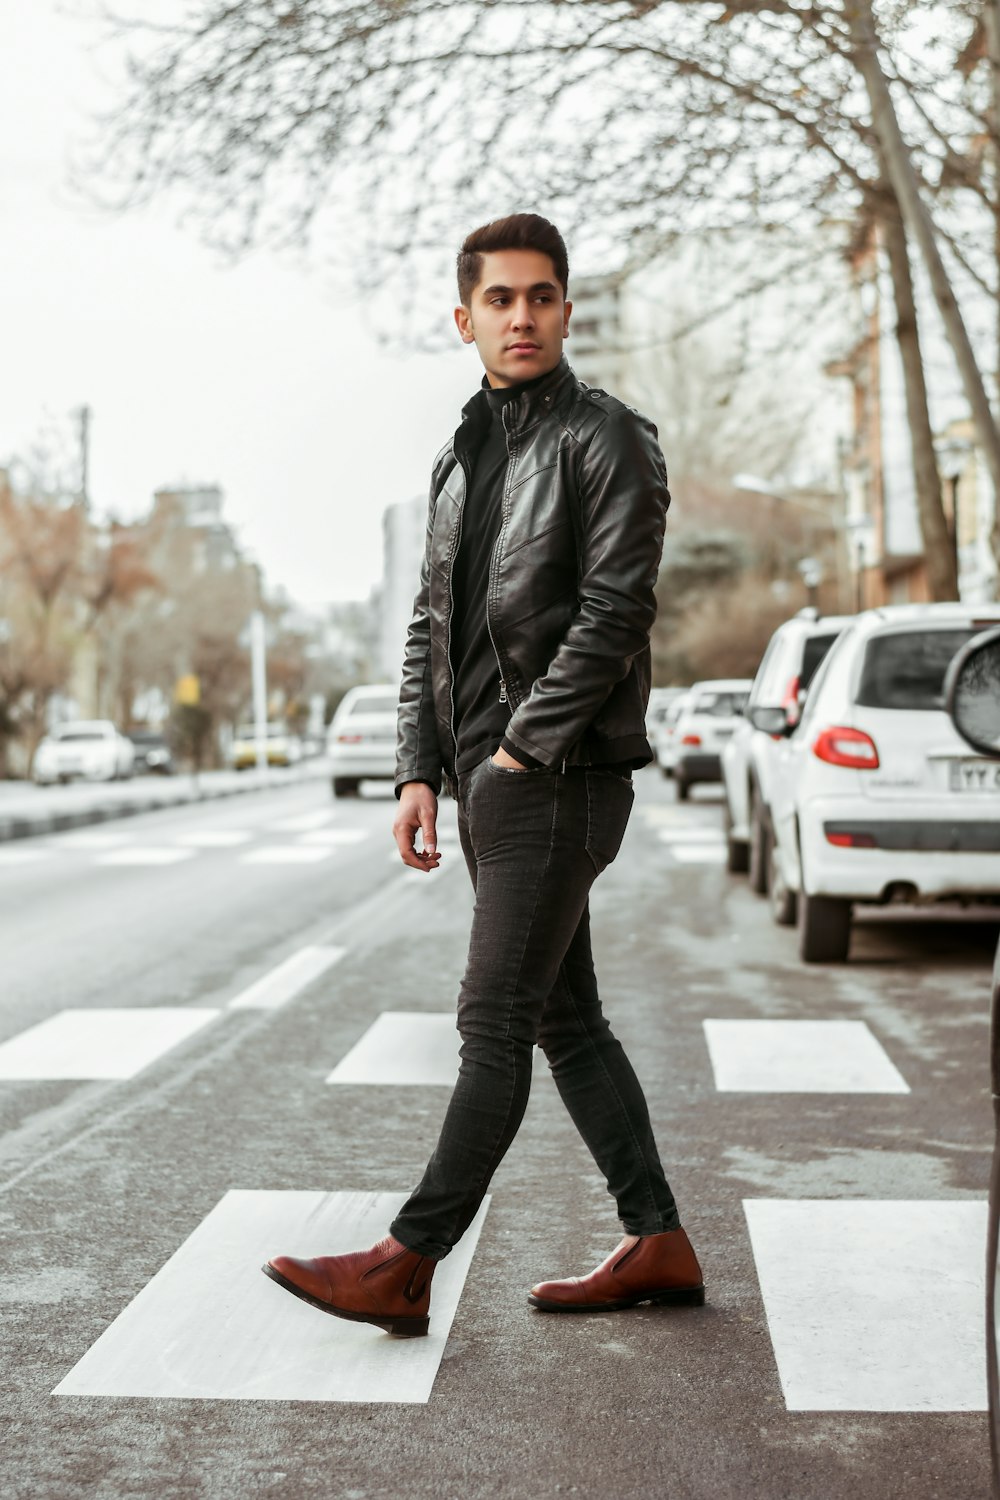 a man in a leather jacket crossing a street